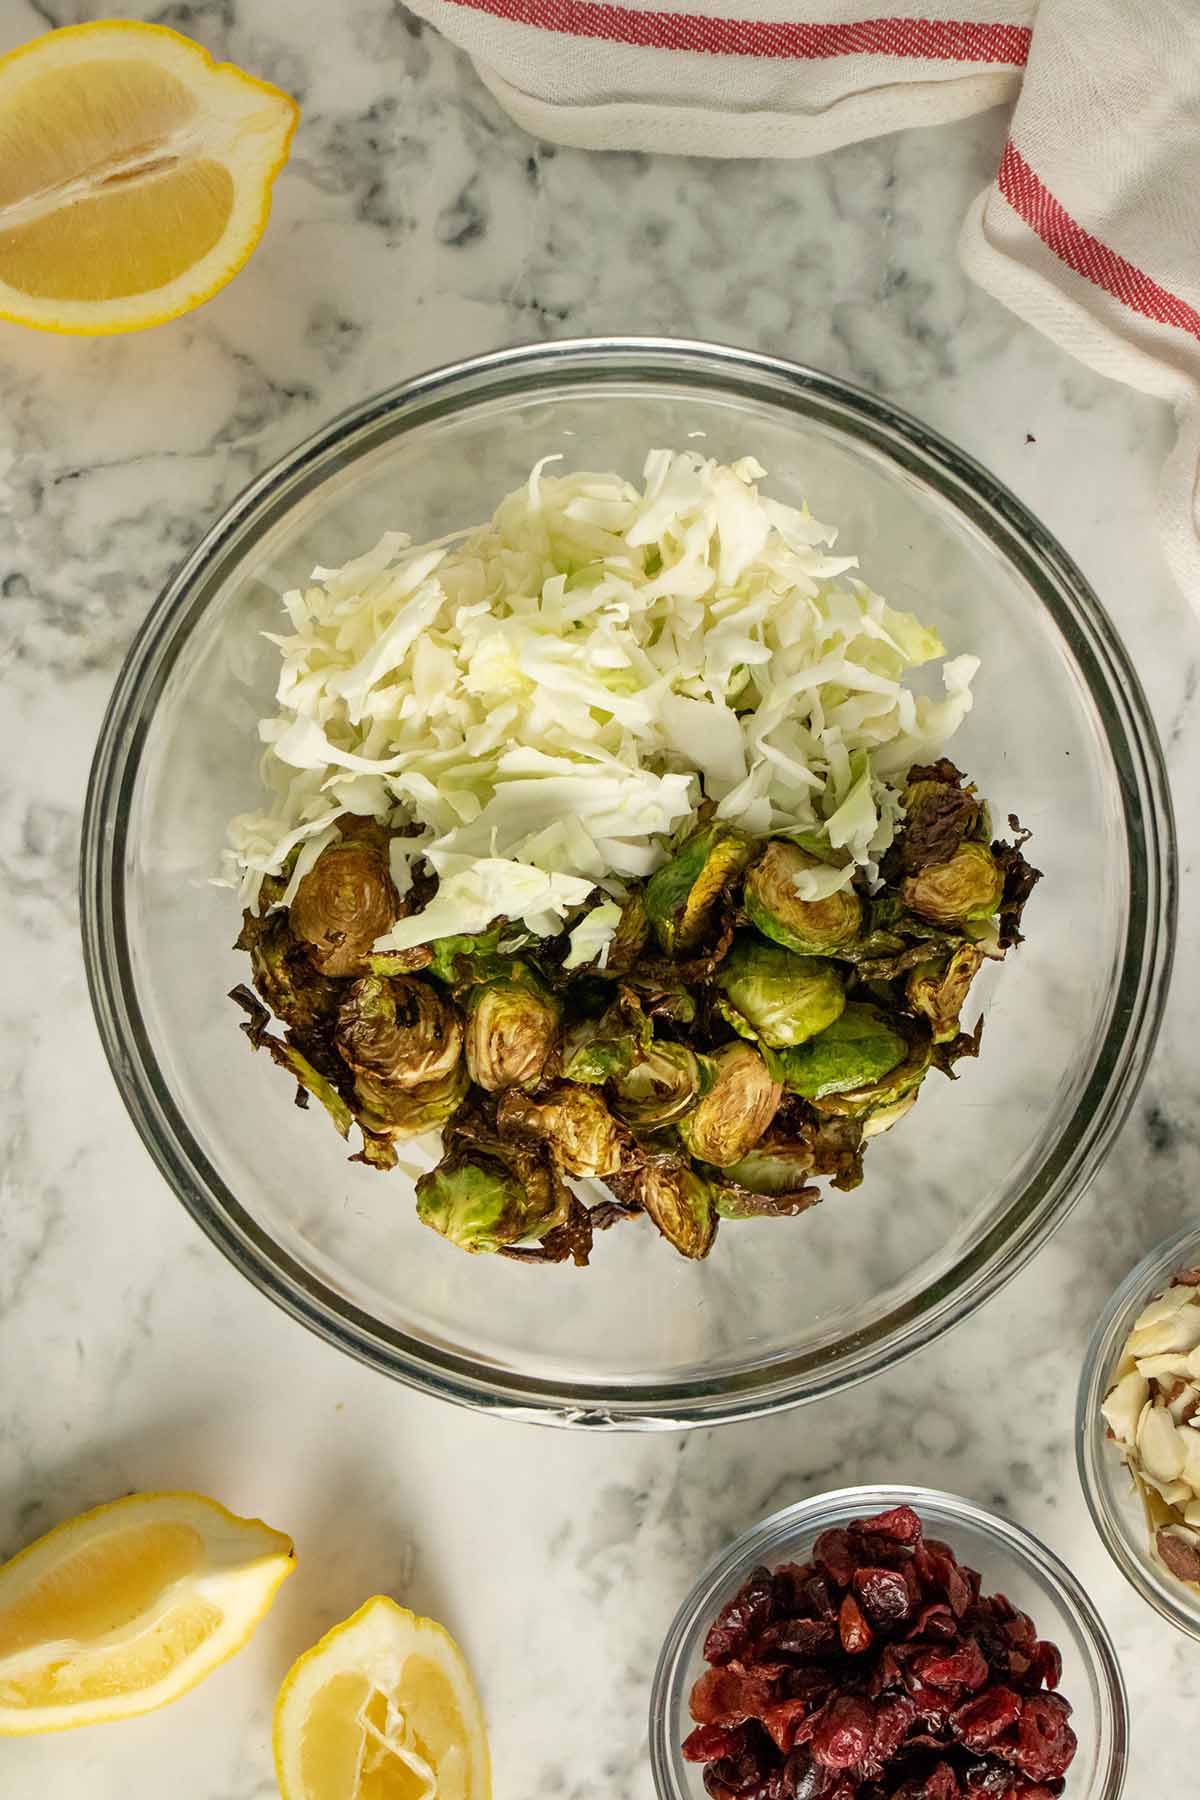 cabbage and cooked Brussels sprouts in a mixing bowl surrounded by other salad ingredients